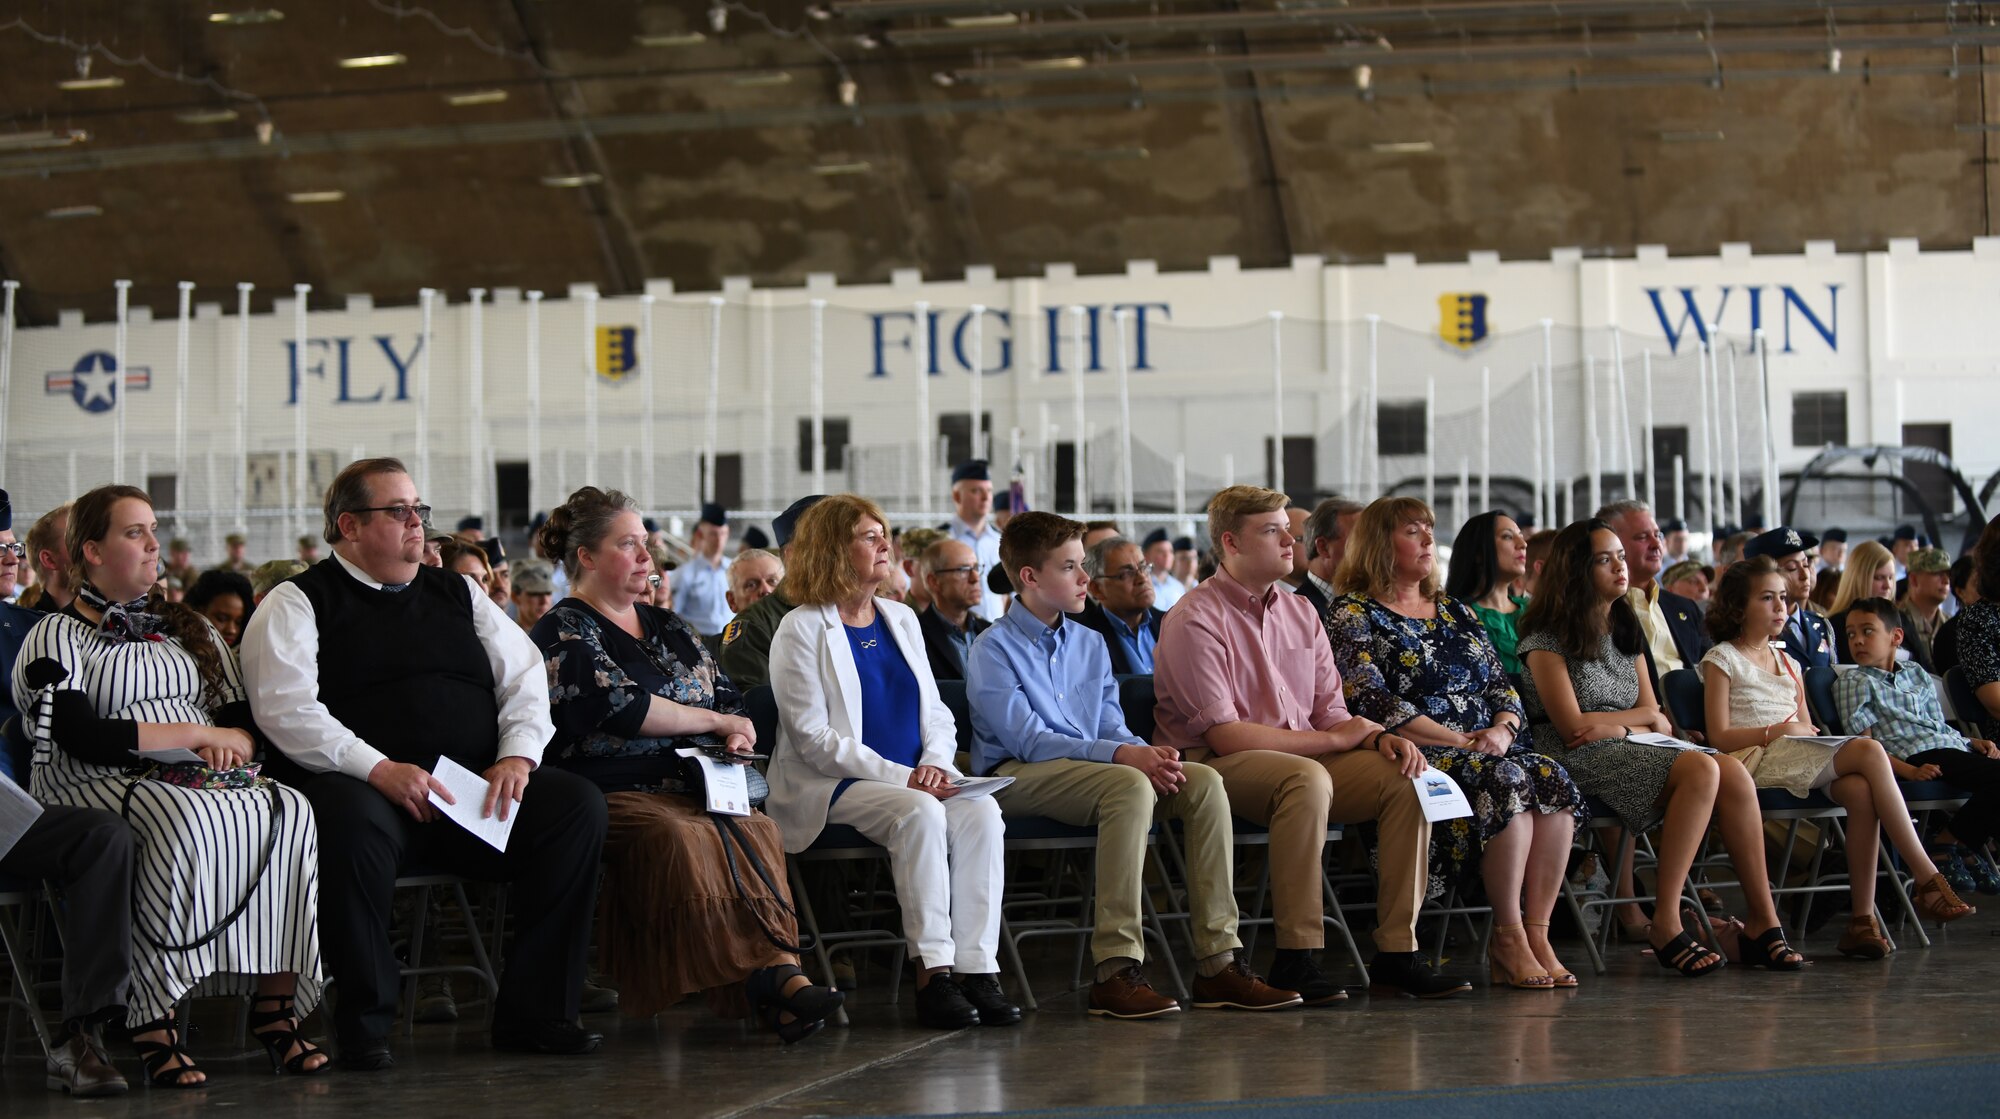 The family of Col. David A. Doss, the 28th Bomb Wing commander, sits alongside the family of outgoing commander, Col. John Edwards at a change of command ceremony on Ellsworth Air Force Base, S.D., May 20, 2019. As commander, Doss will take responsibility of the base and more than 3,700 total-force Airmen as well as a fleet of 27 B-1B Lancers. (U.S. Air Force photos by Airman 1st Class Christina Bennett)